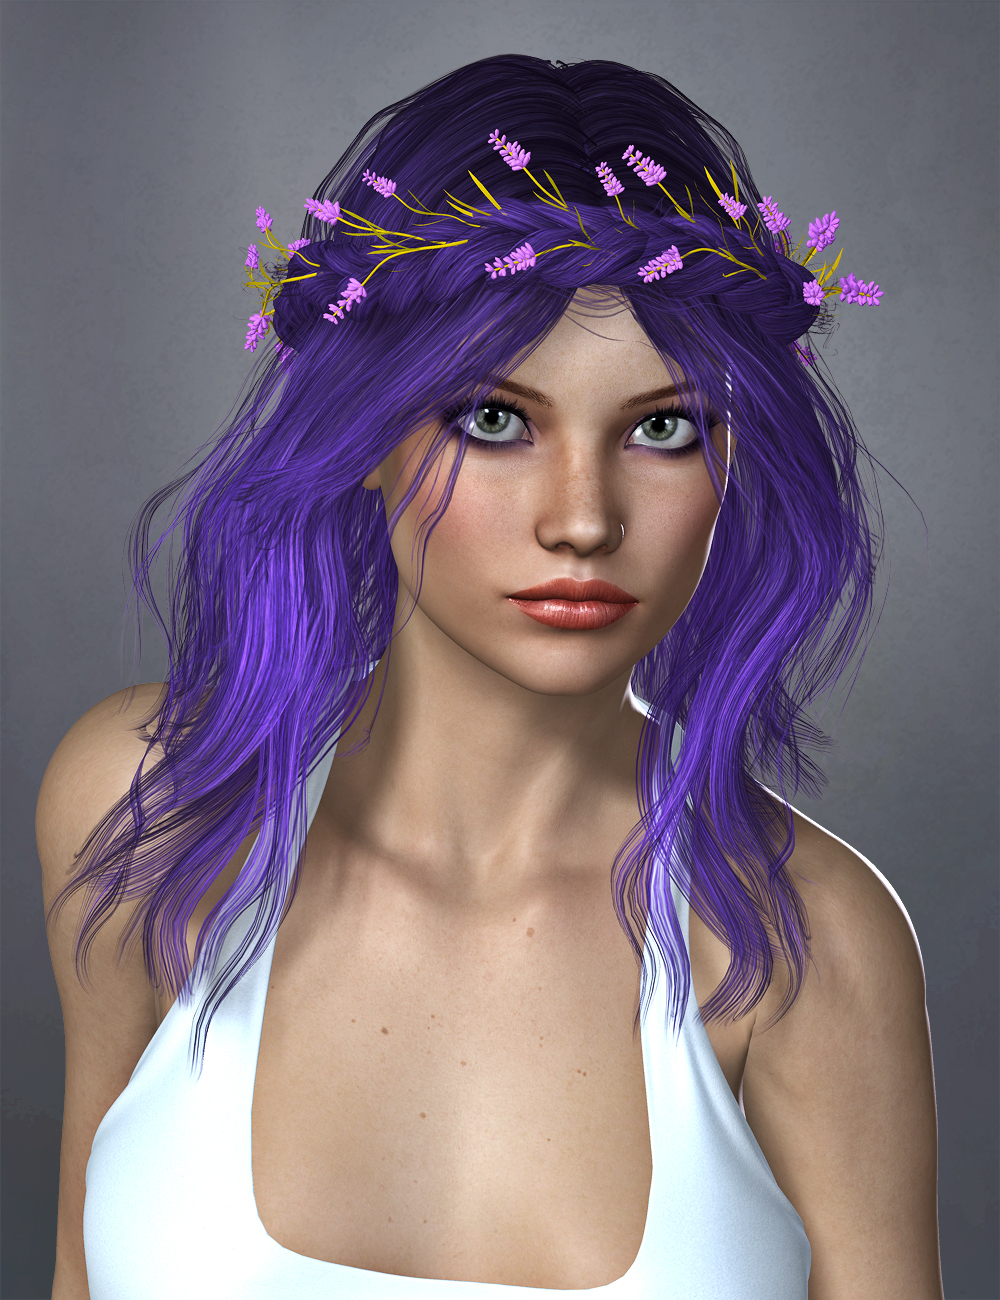 Zea Hair Colors and Wreath by: SWAM, 3D Models by Daz 3D